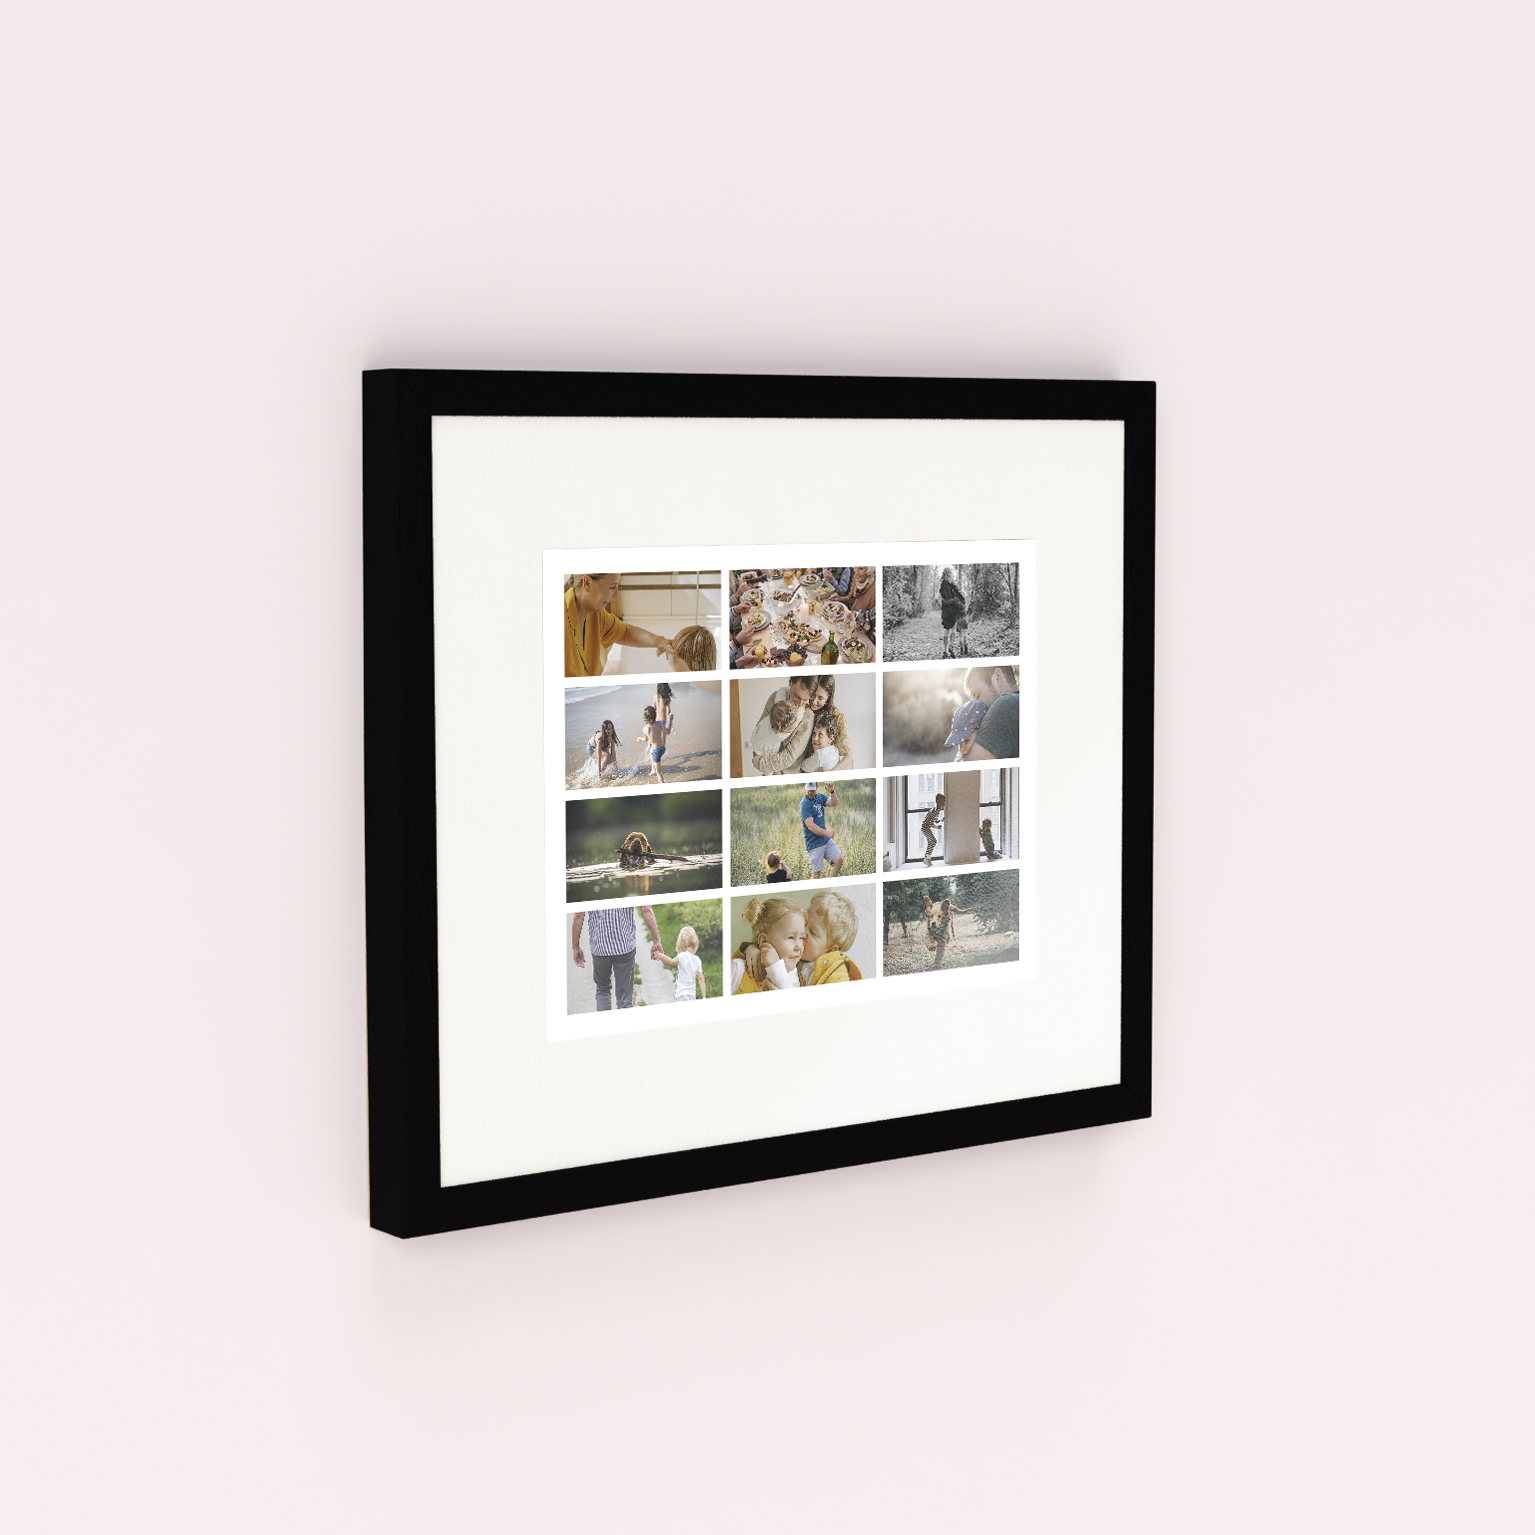 Collage of Life Framed Photo Prints - Introduce a personalised way to curate 10+ cherished memories with these landscape-oriented framed prints. Offer a beautiful compilation of special moments, immersing yourself in nostalgia and celebrating life's journey with a heartfelt display that keeps precious moments close at hand. Ideal for those with a multitude of photos, it's a beautiful way to evoke fond memories.